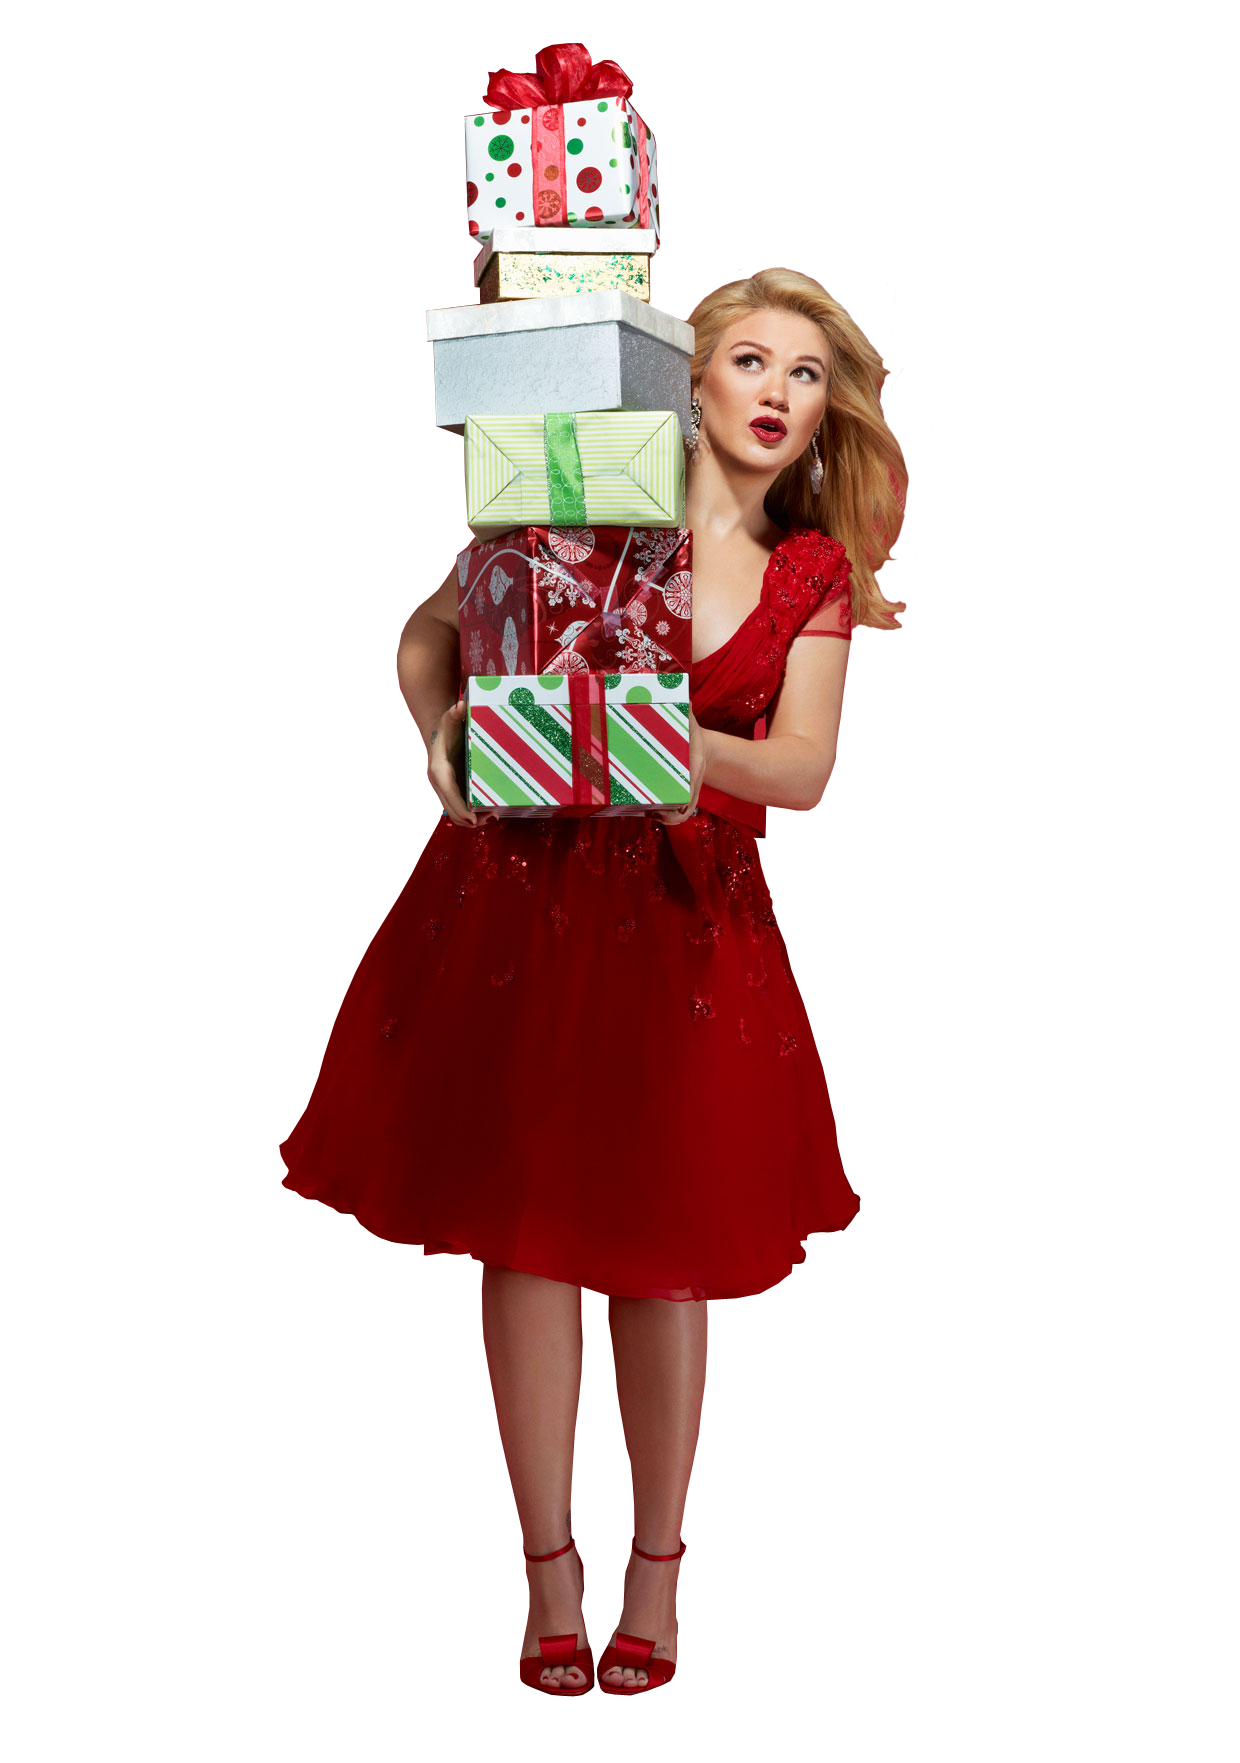 Kelly Clarkson Image PNG Image